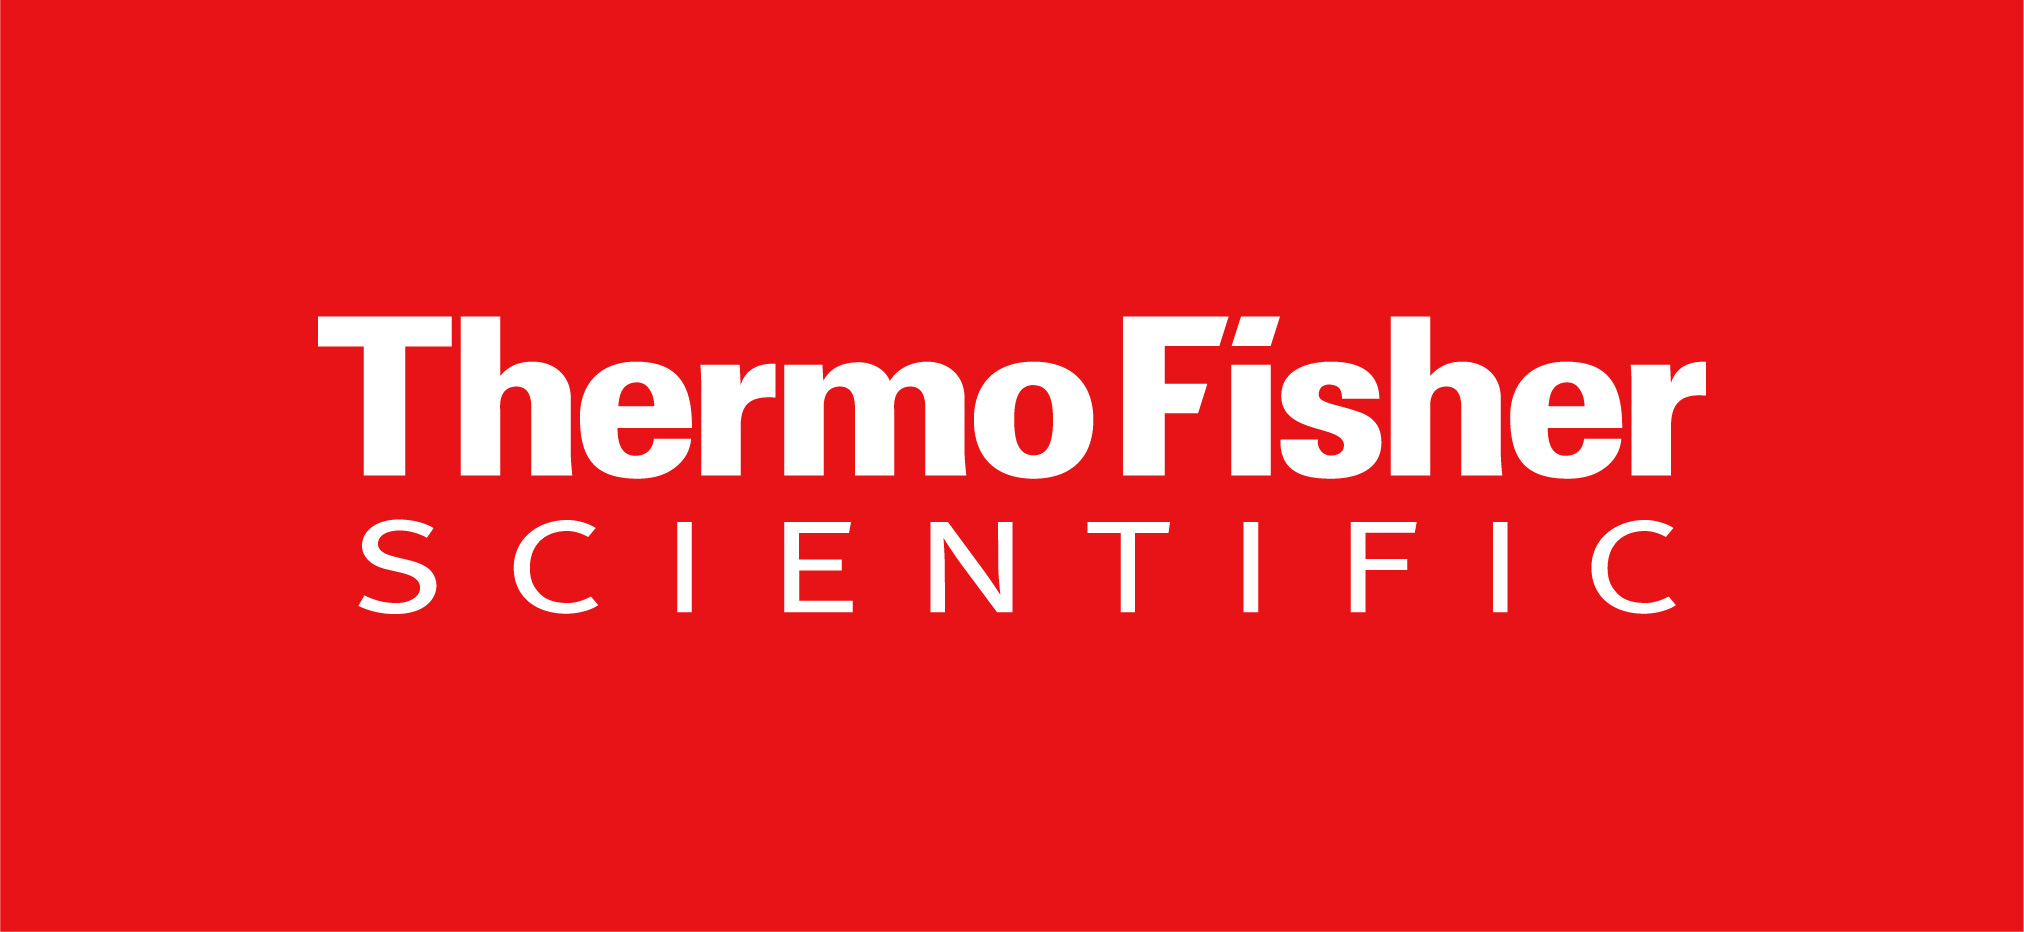 https://www.thermofisher.com/sg/en/home/clinical/cell-gene-therapy/cell-therapy.html